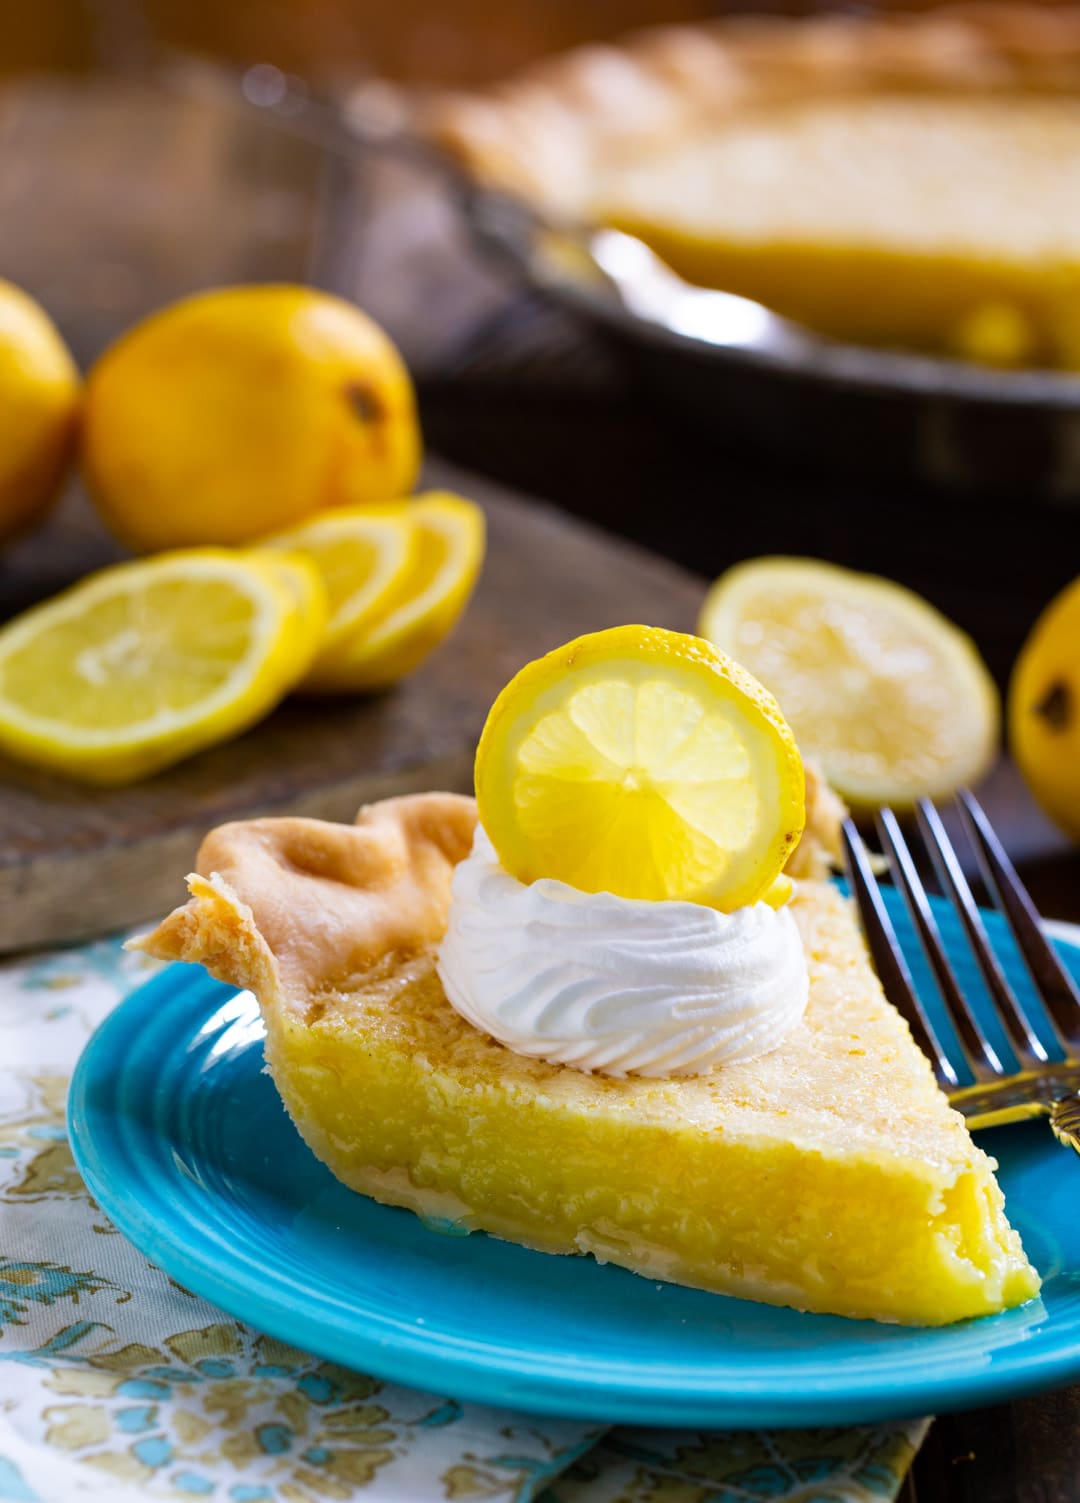 Slice of pie on plate with lemons in background.